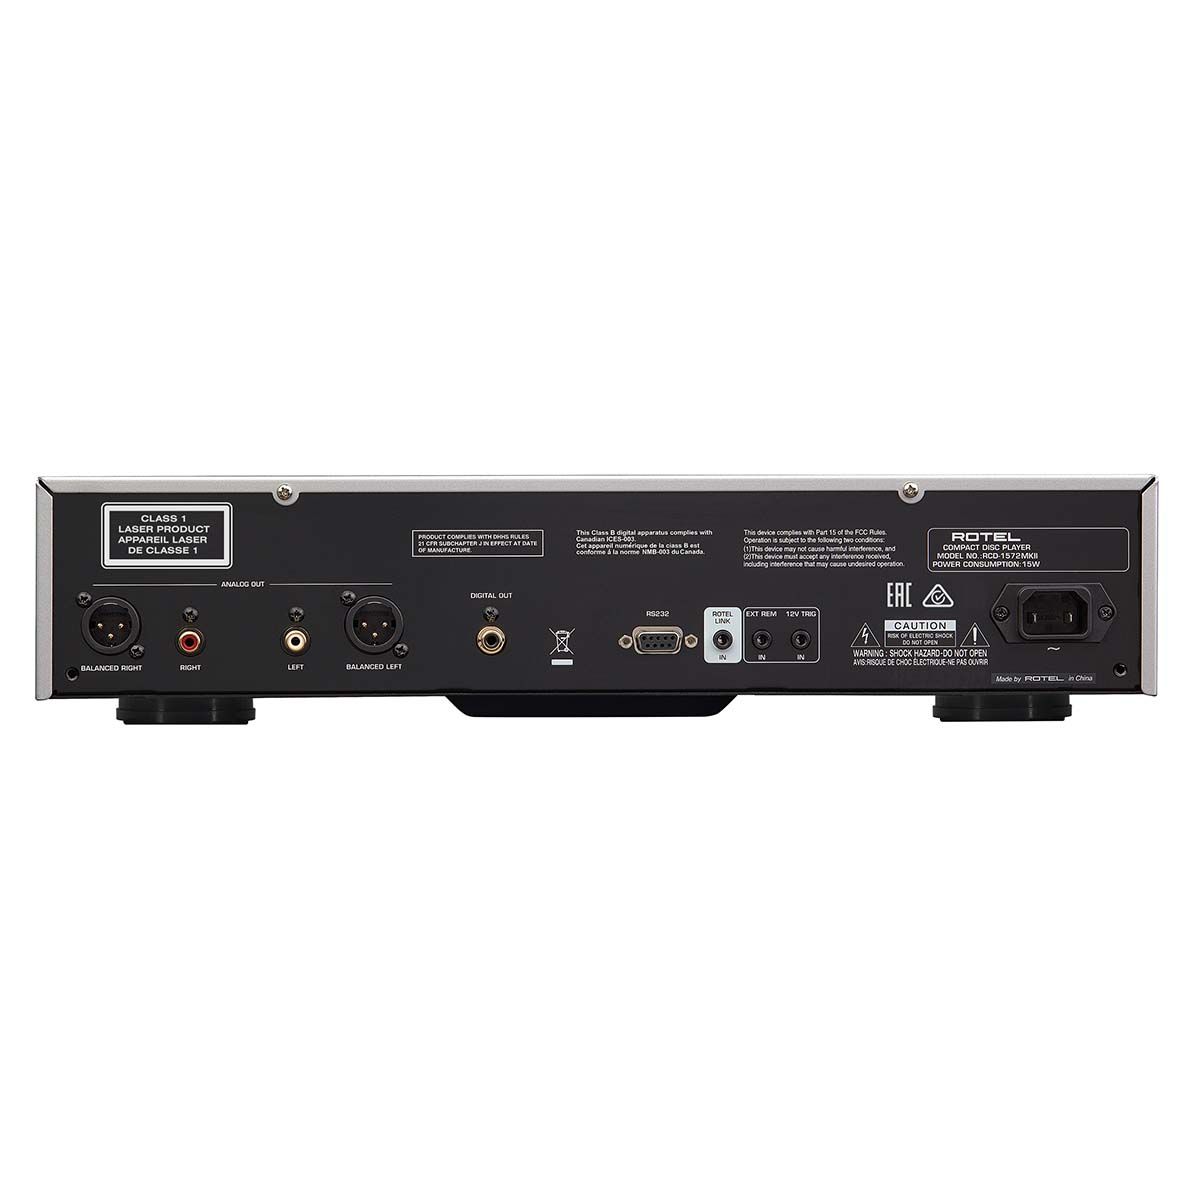 Rotel RCD-1572 MKII CD Player, Silver, rear panel view